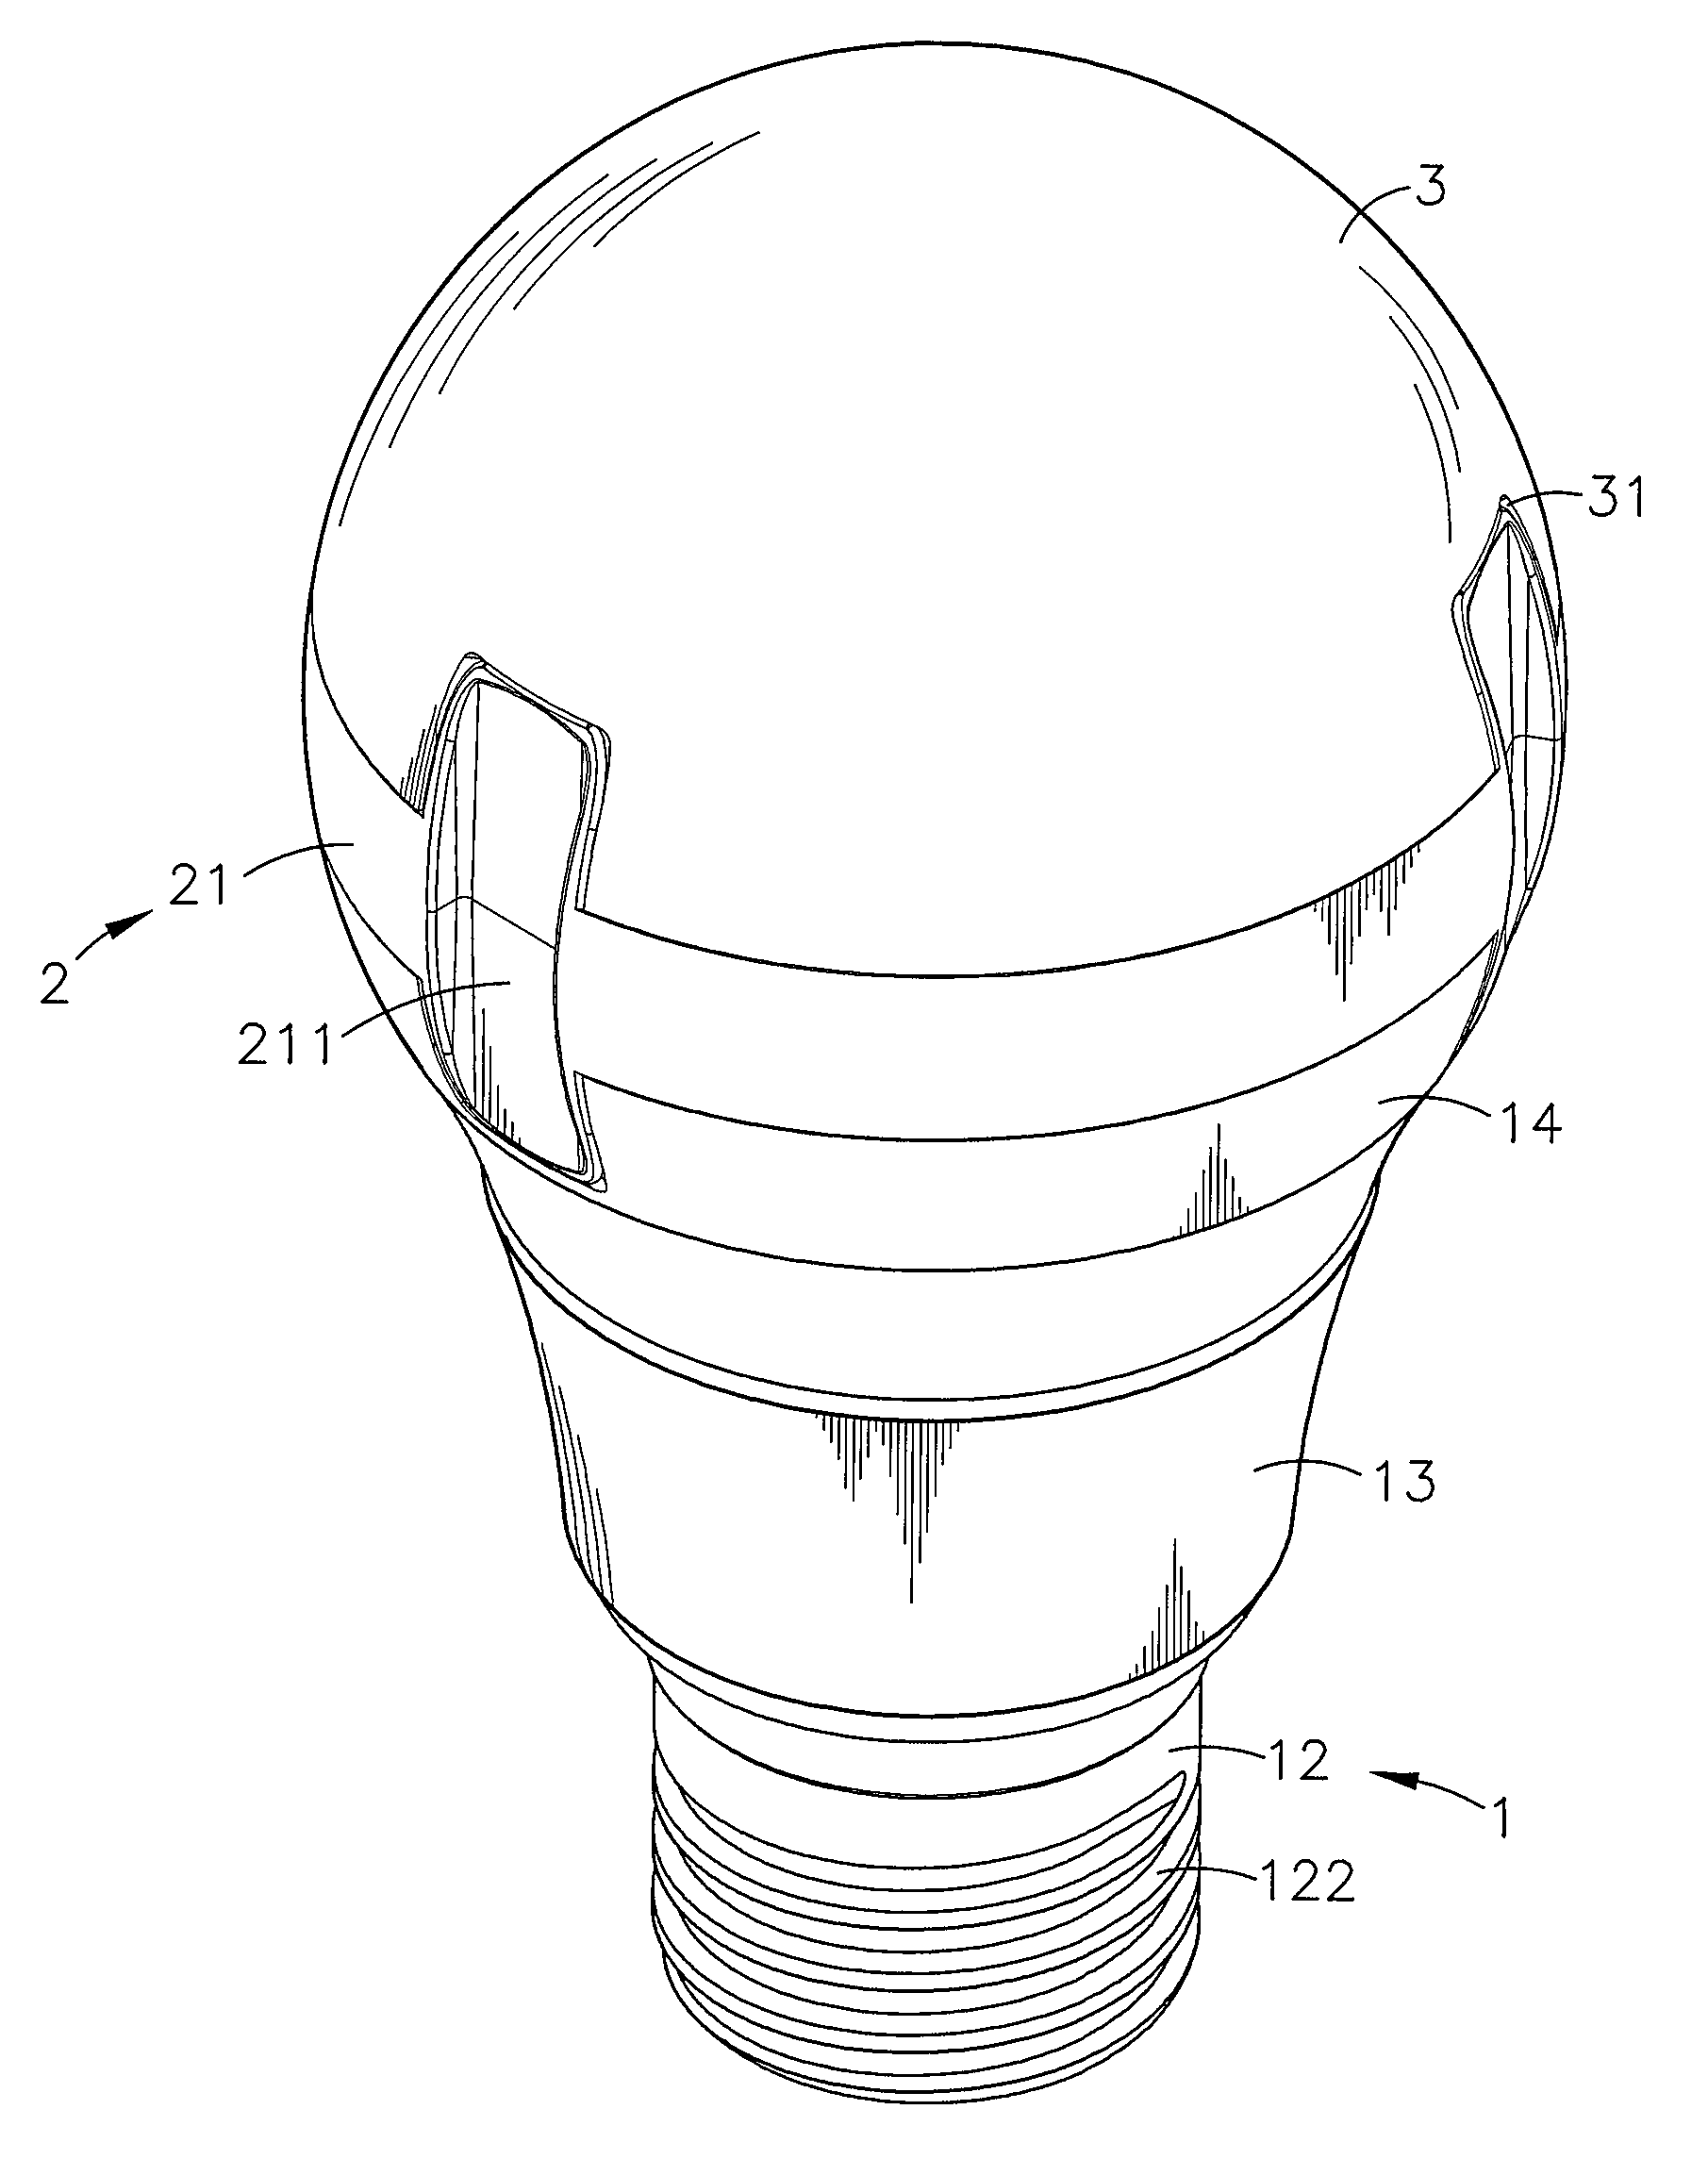 Light bulb with upward and downward facing LEDs having heat dissipation